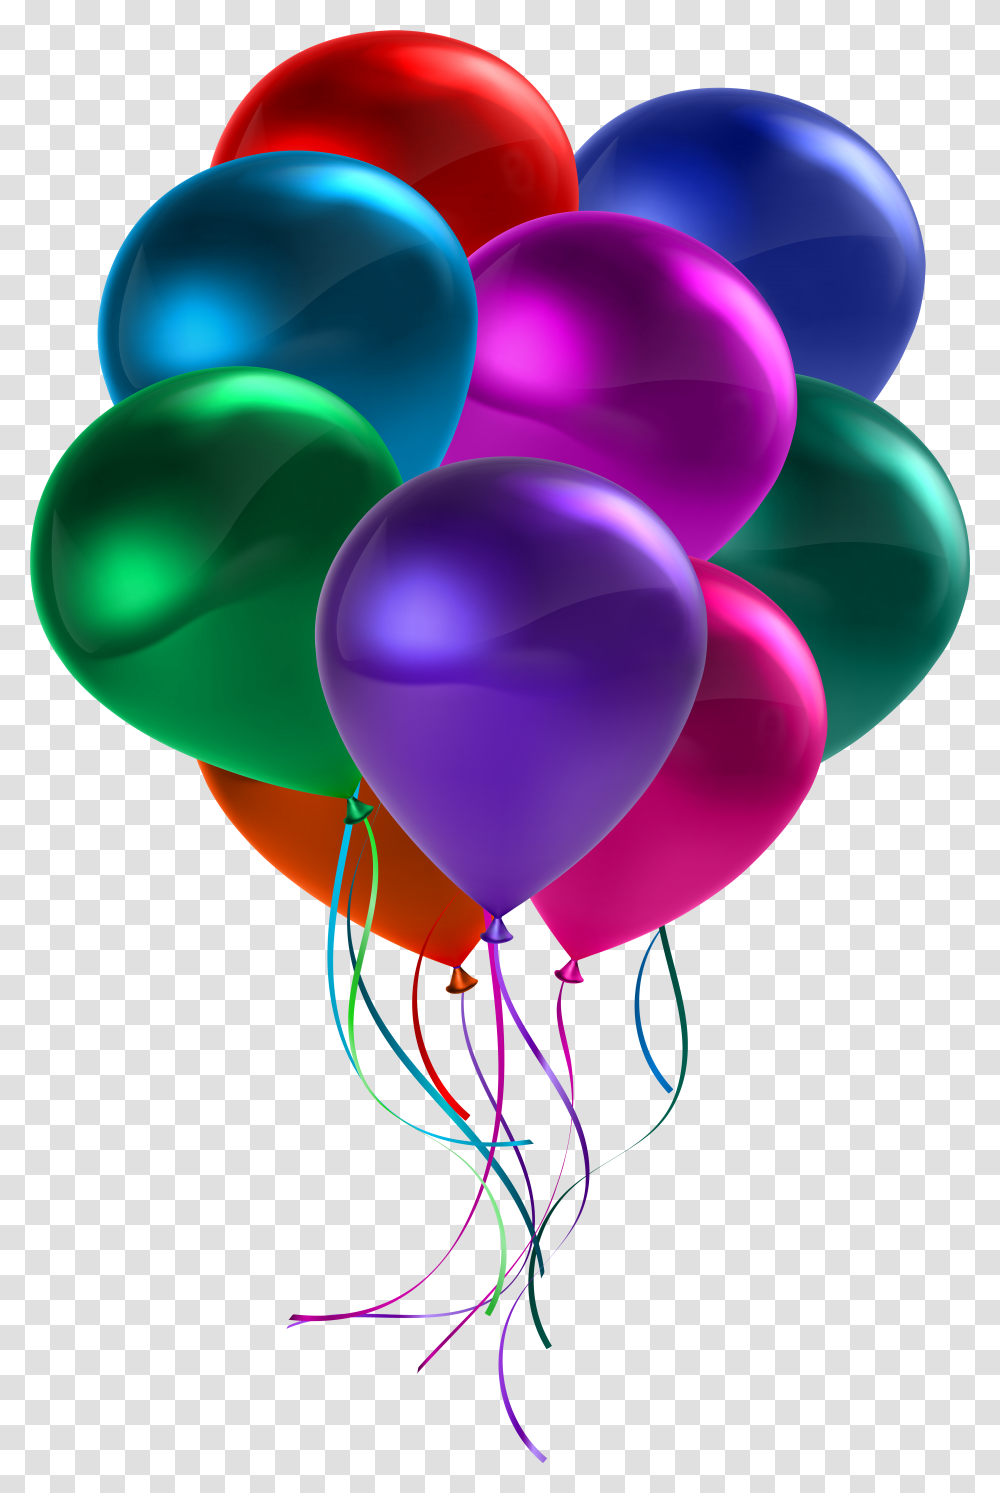 Bunch Of Colorful Balloons Happy Birthday Colorful Balloons Clipart Transparent Png